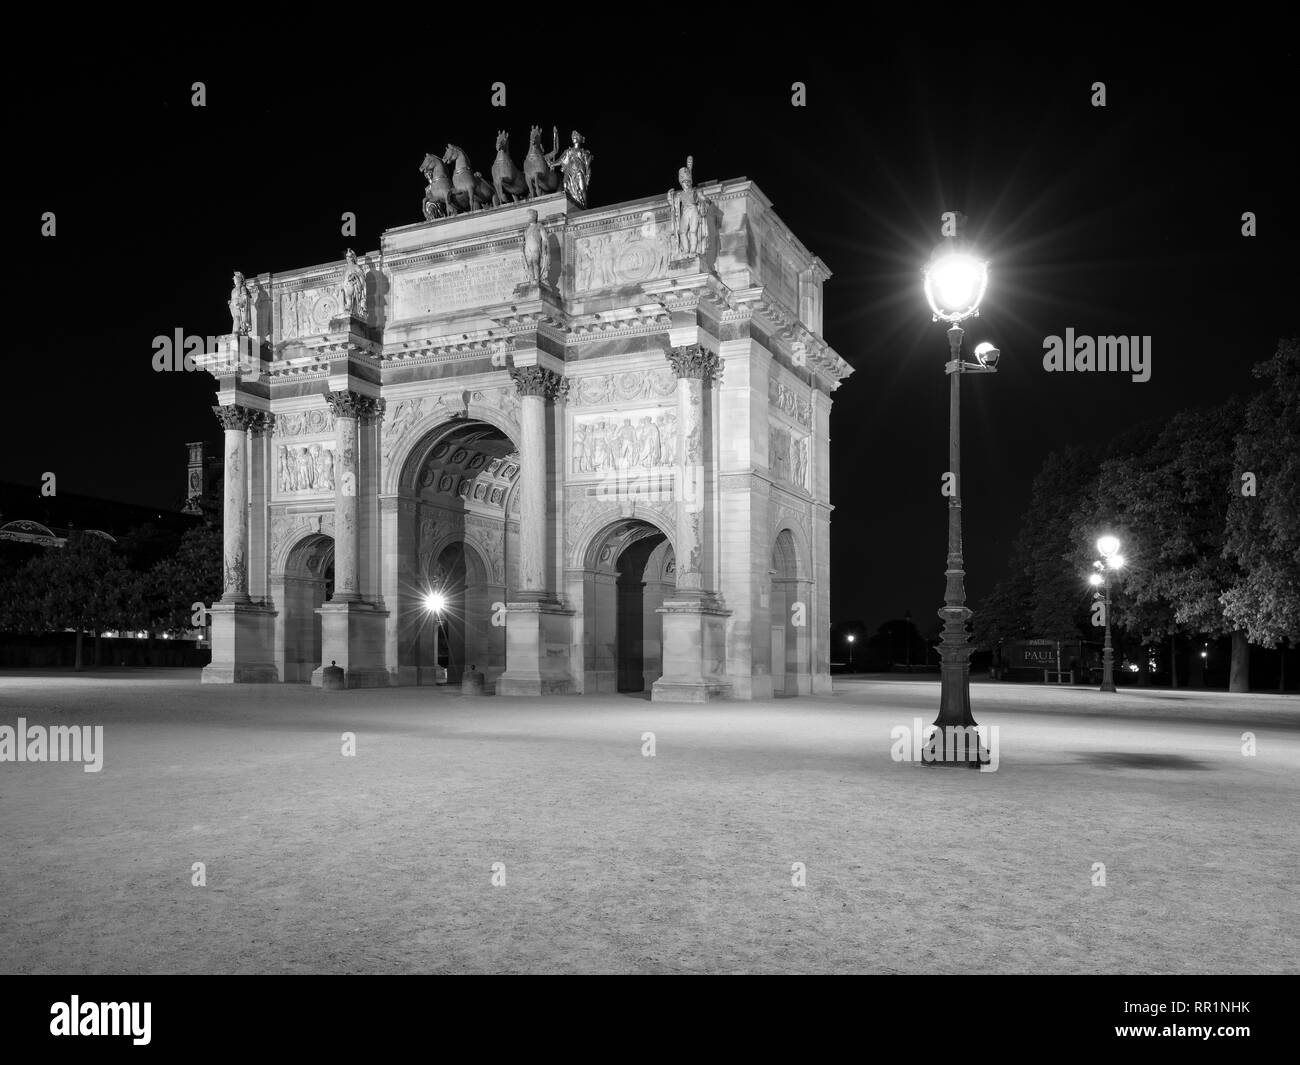 The late night shot of the stunning Arc de Triomphe du Carrousel is a triumphal arch in Paris. Stock Photo